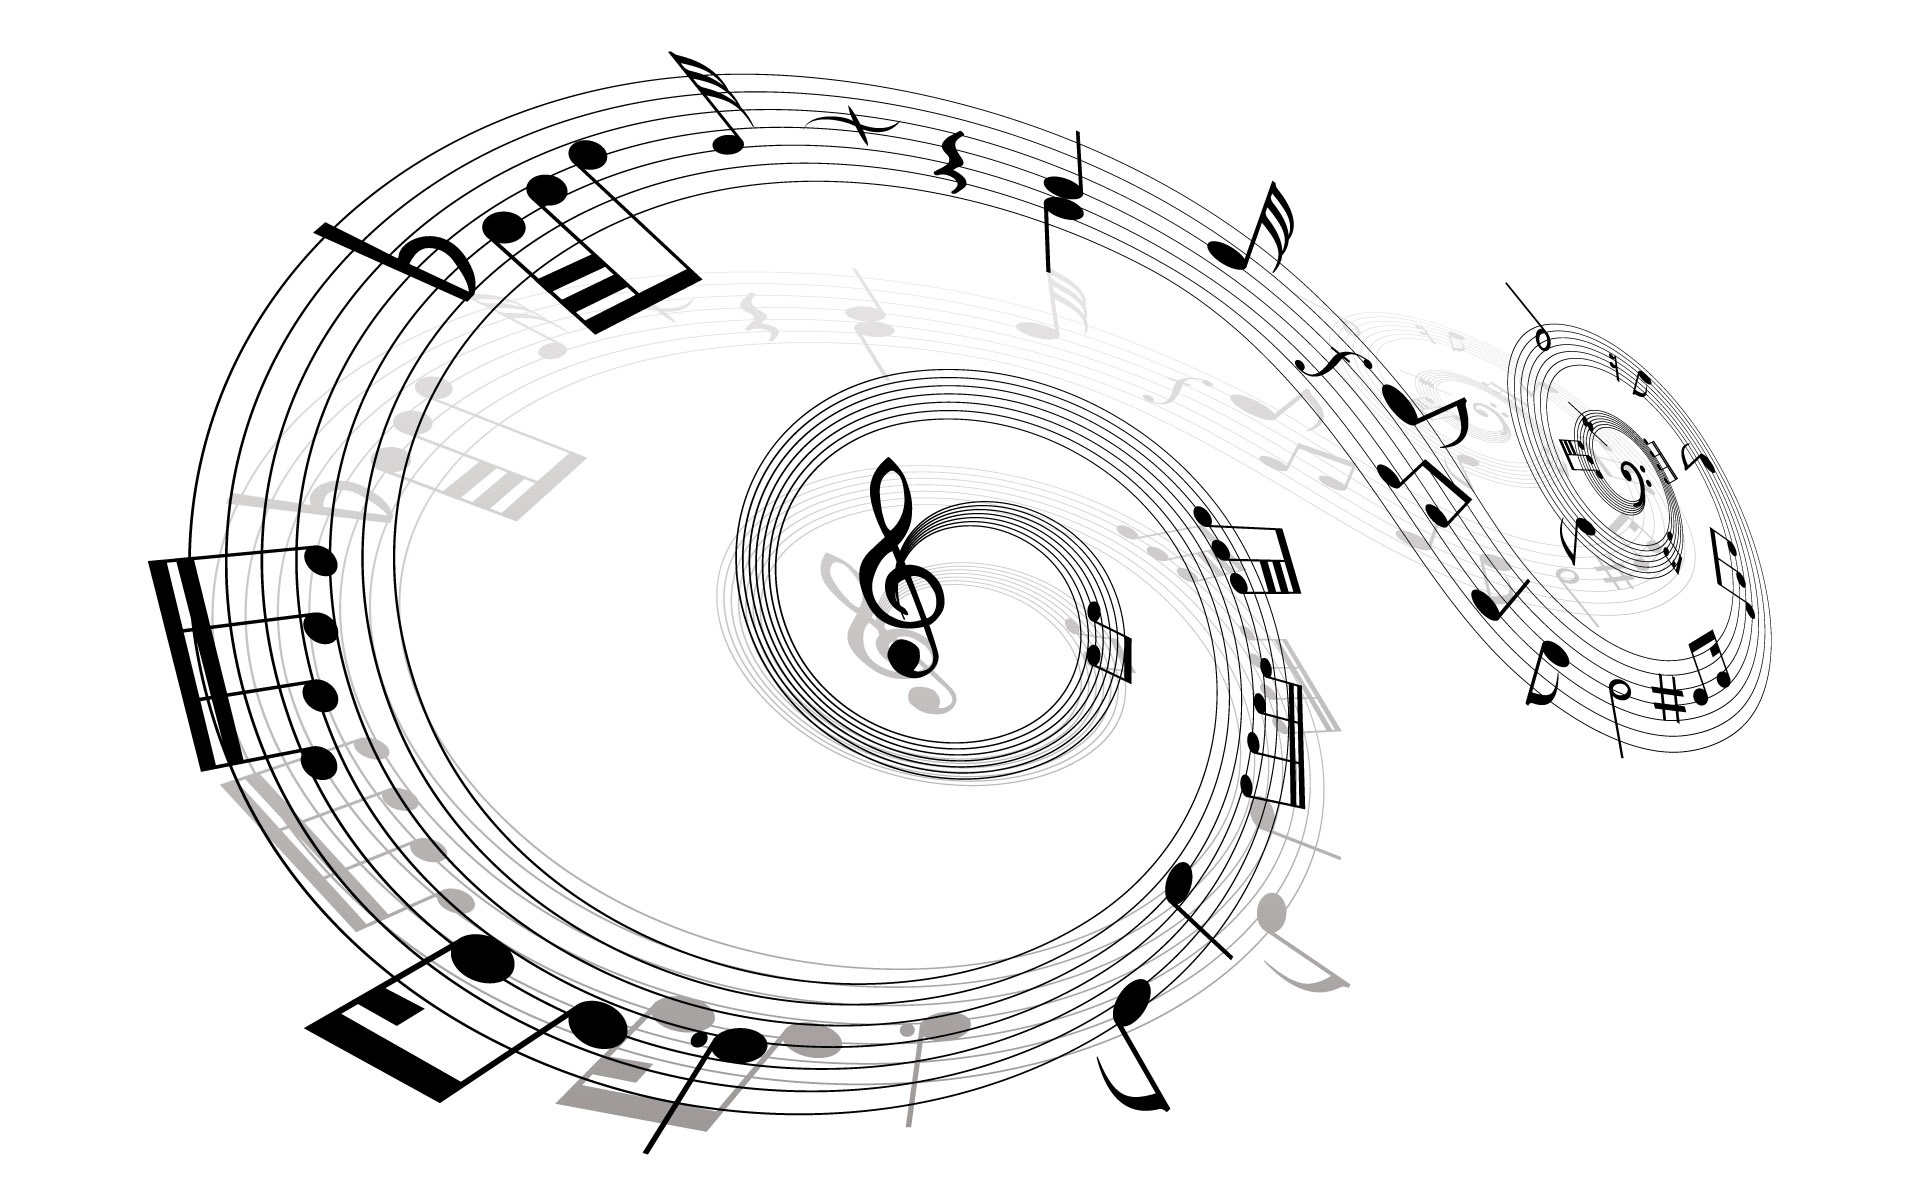 Musical music notes symbols clip art free clipart images 2 image